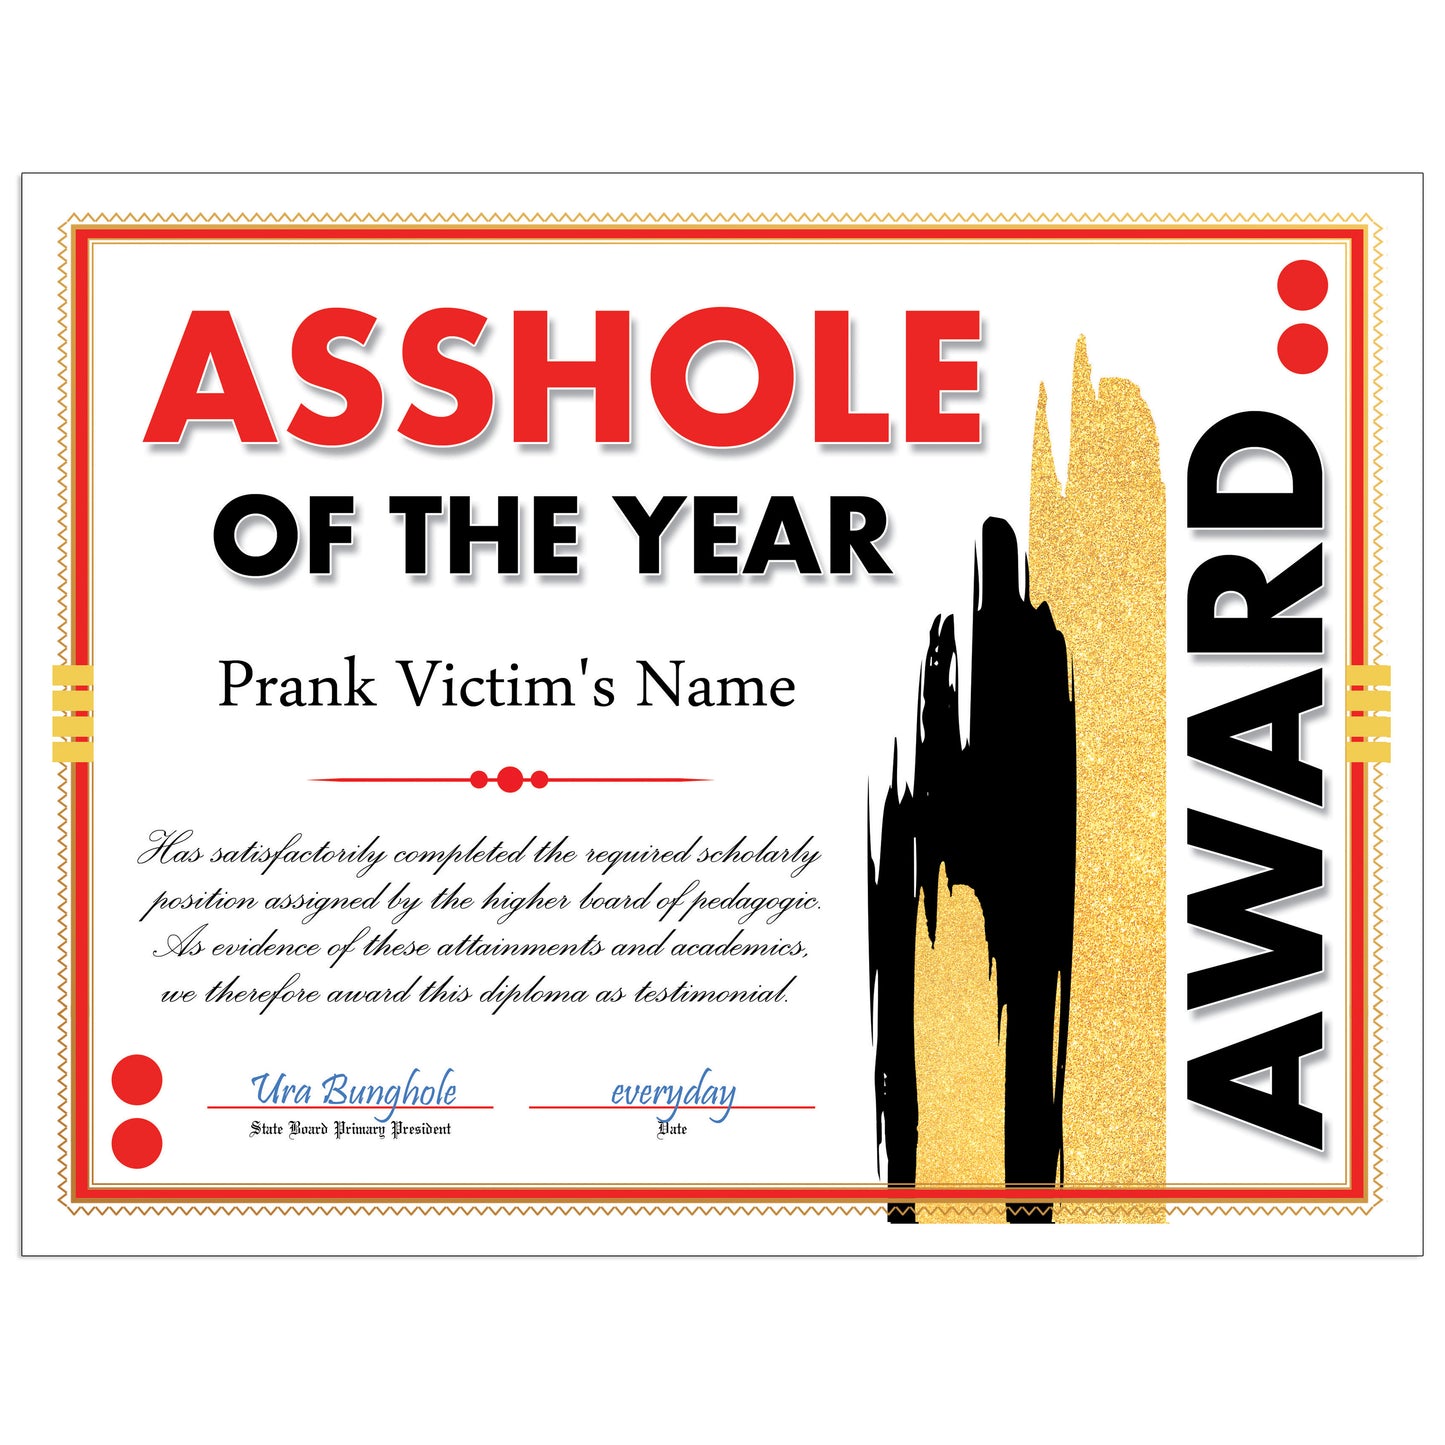 Asshole of the Year Certificate Award Prank Mail Letter